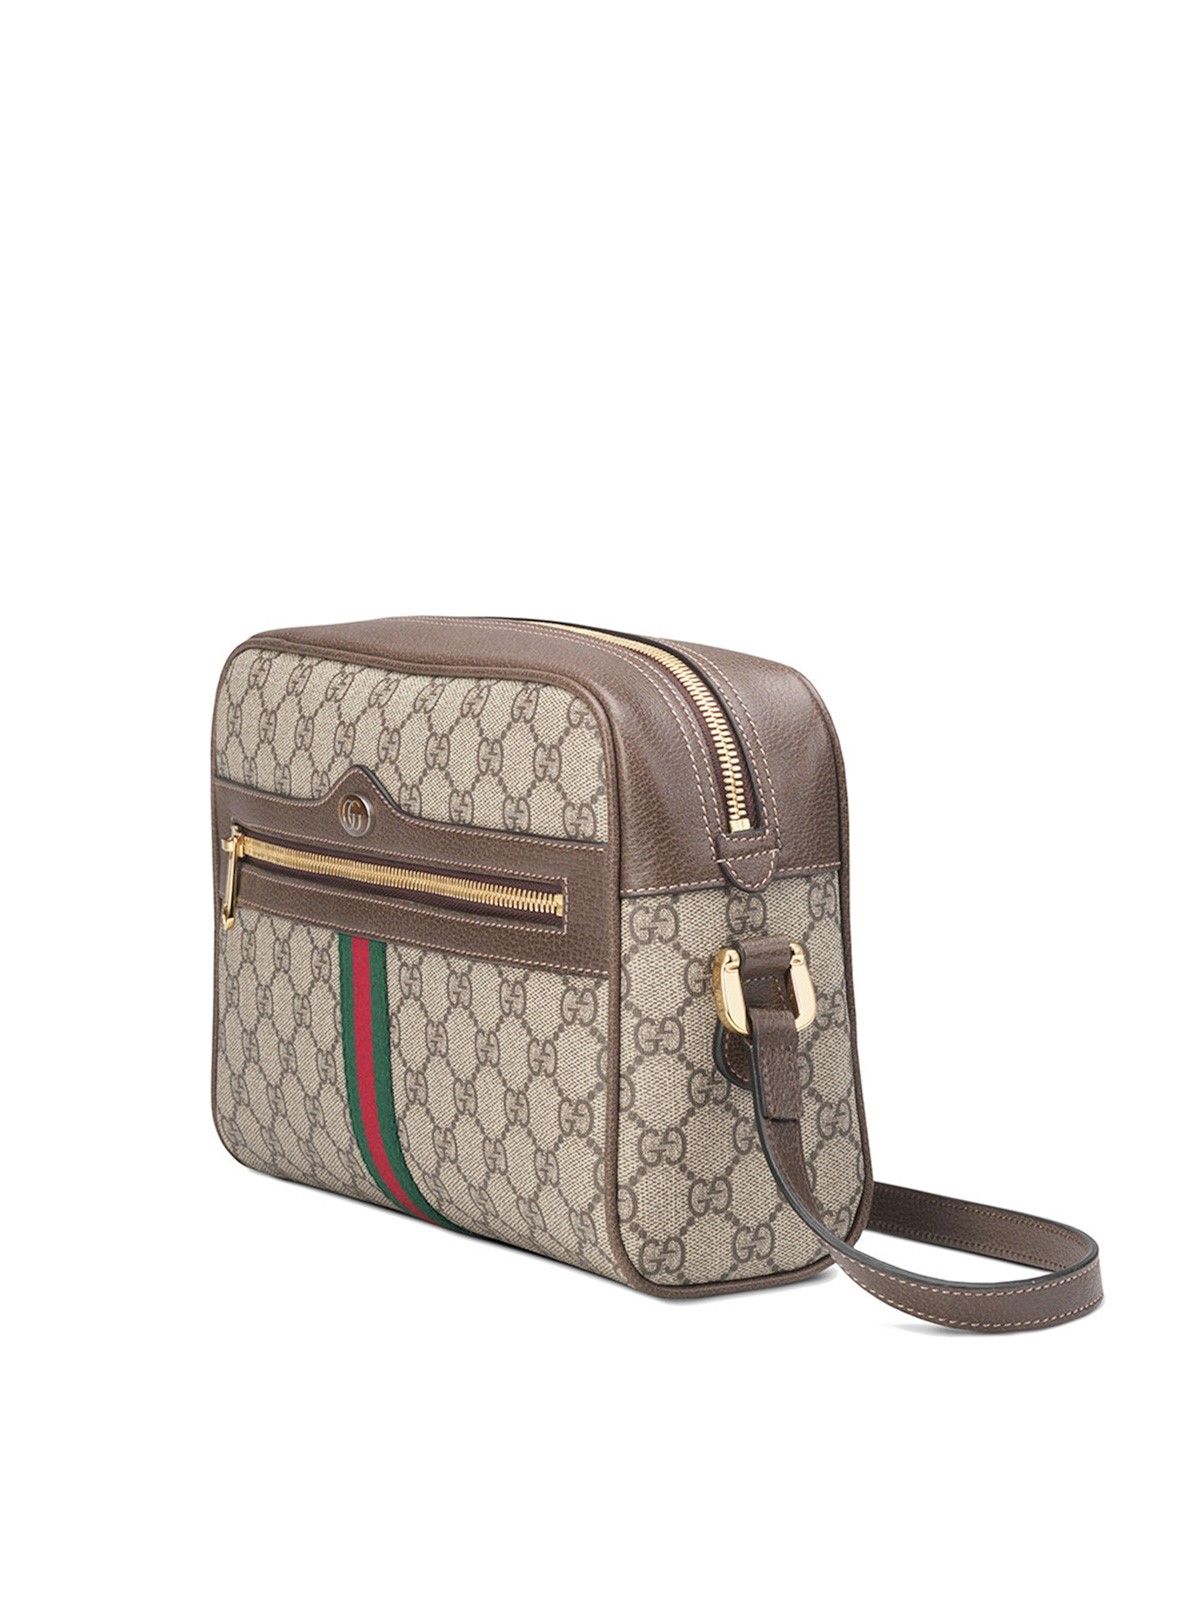 gucci OPHIDIA SHOULDER BAG available on www.bagssaleusa.com/product-category/classic-bags/ - 22340